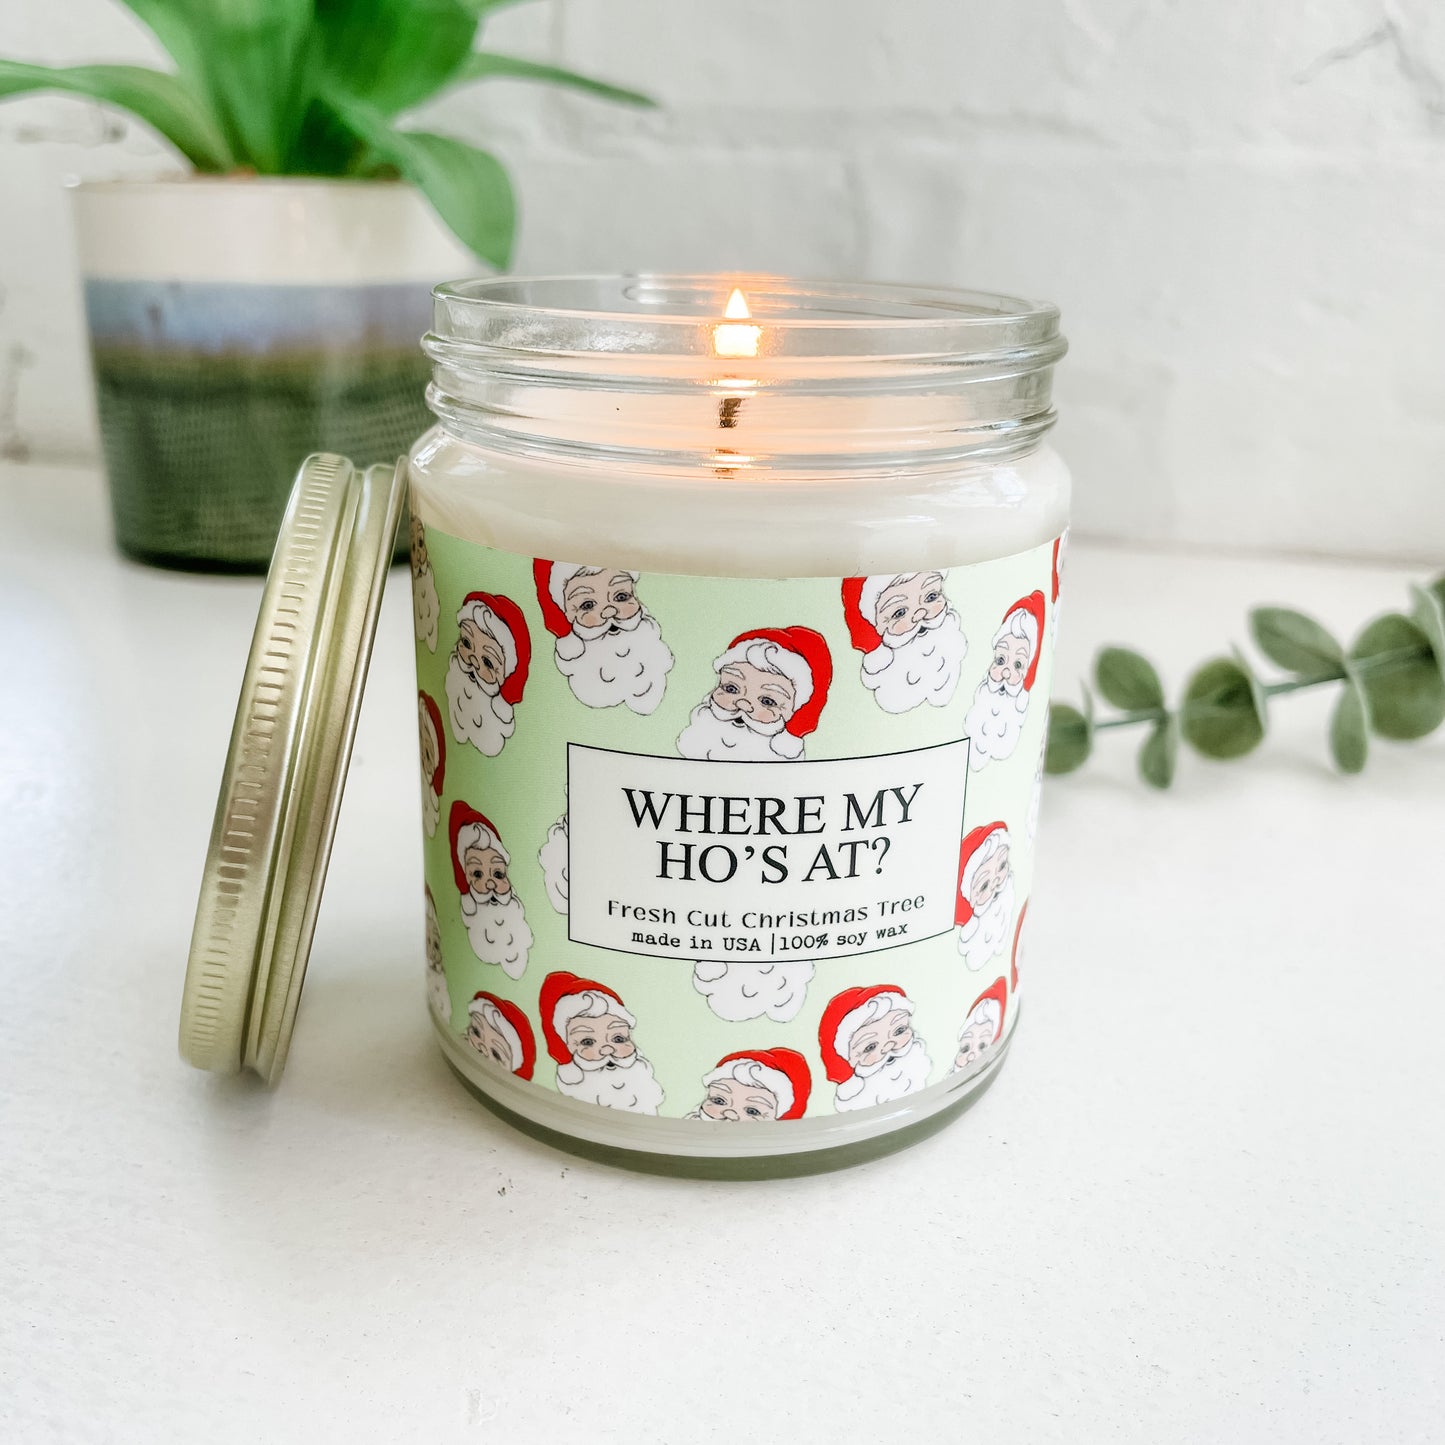 Where My Ho's At? - 9oz Glass Jar Soy Candle - Fresh Cut Christmas Tree Scent